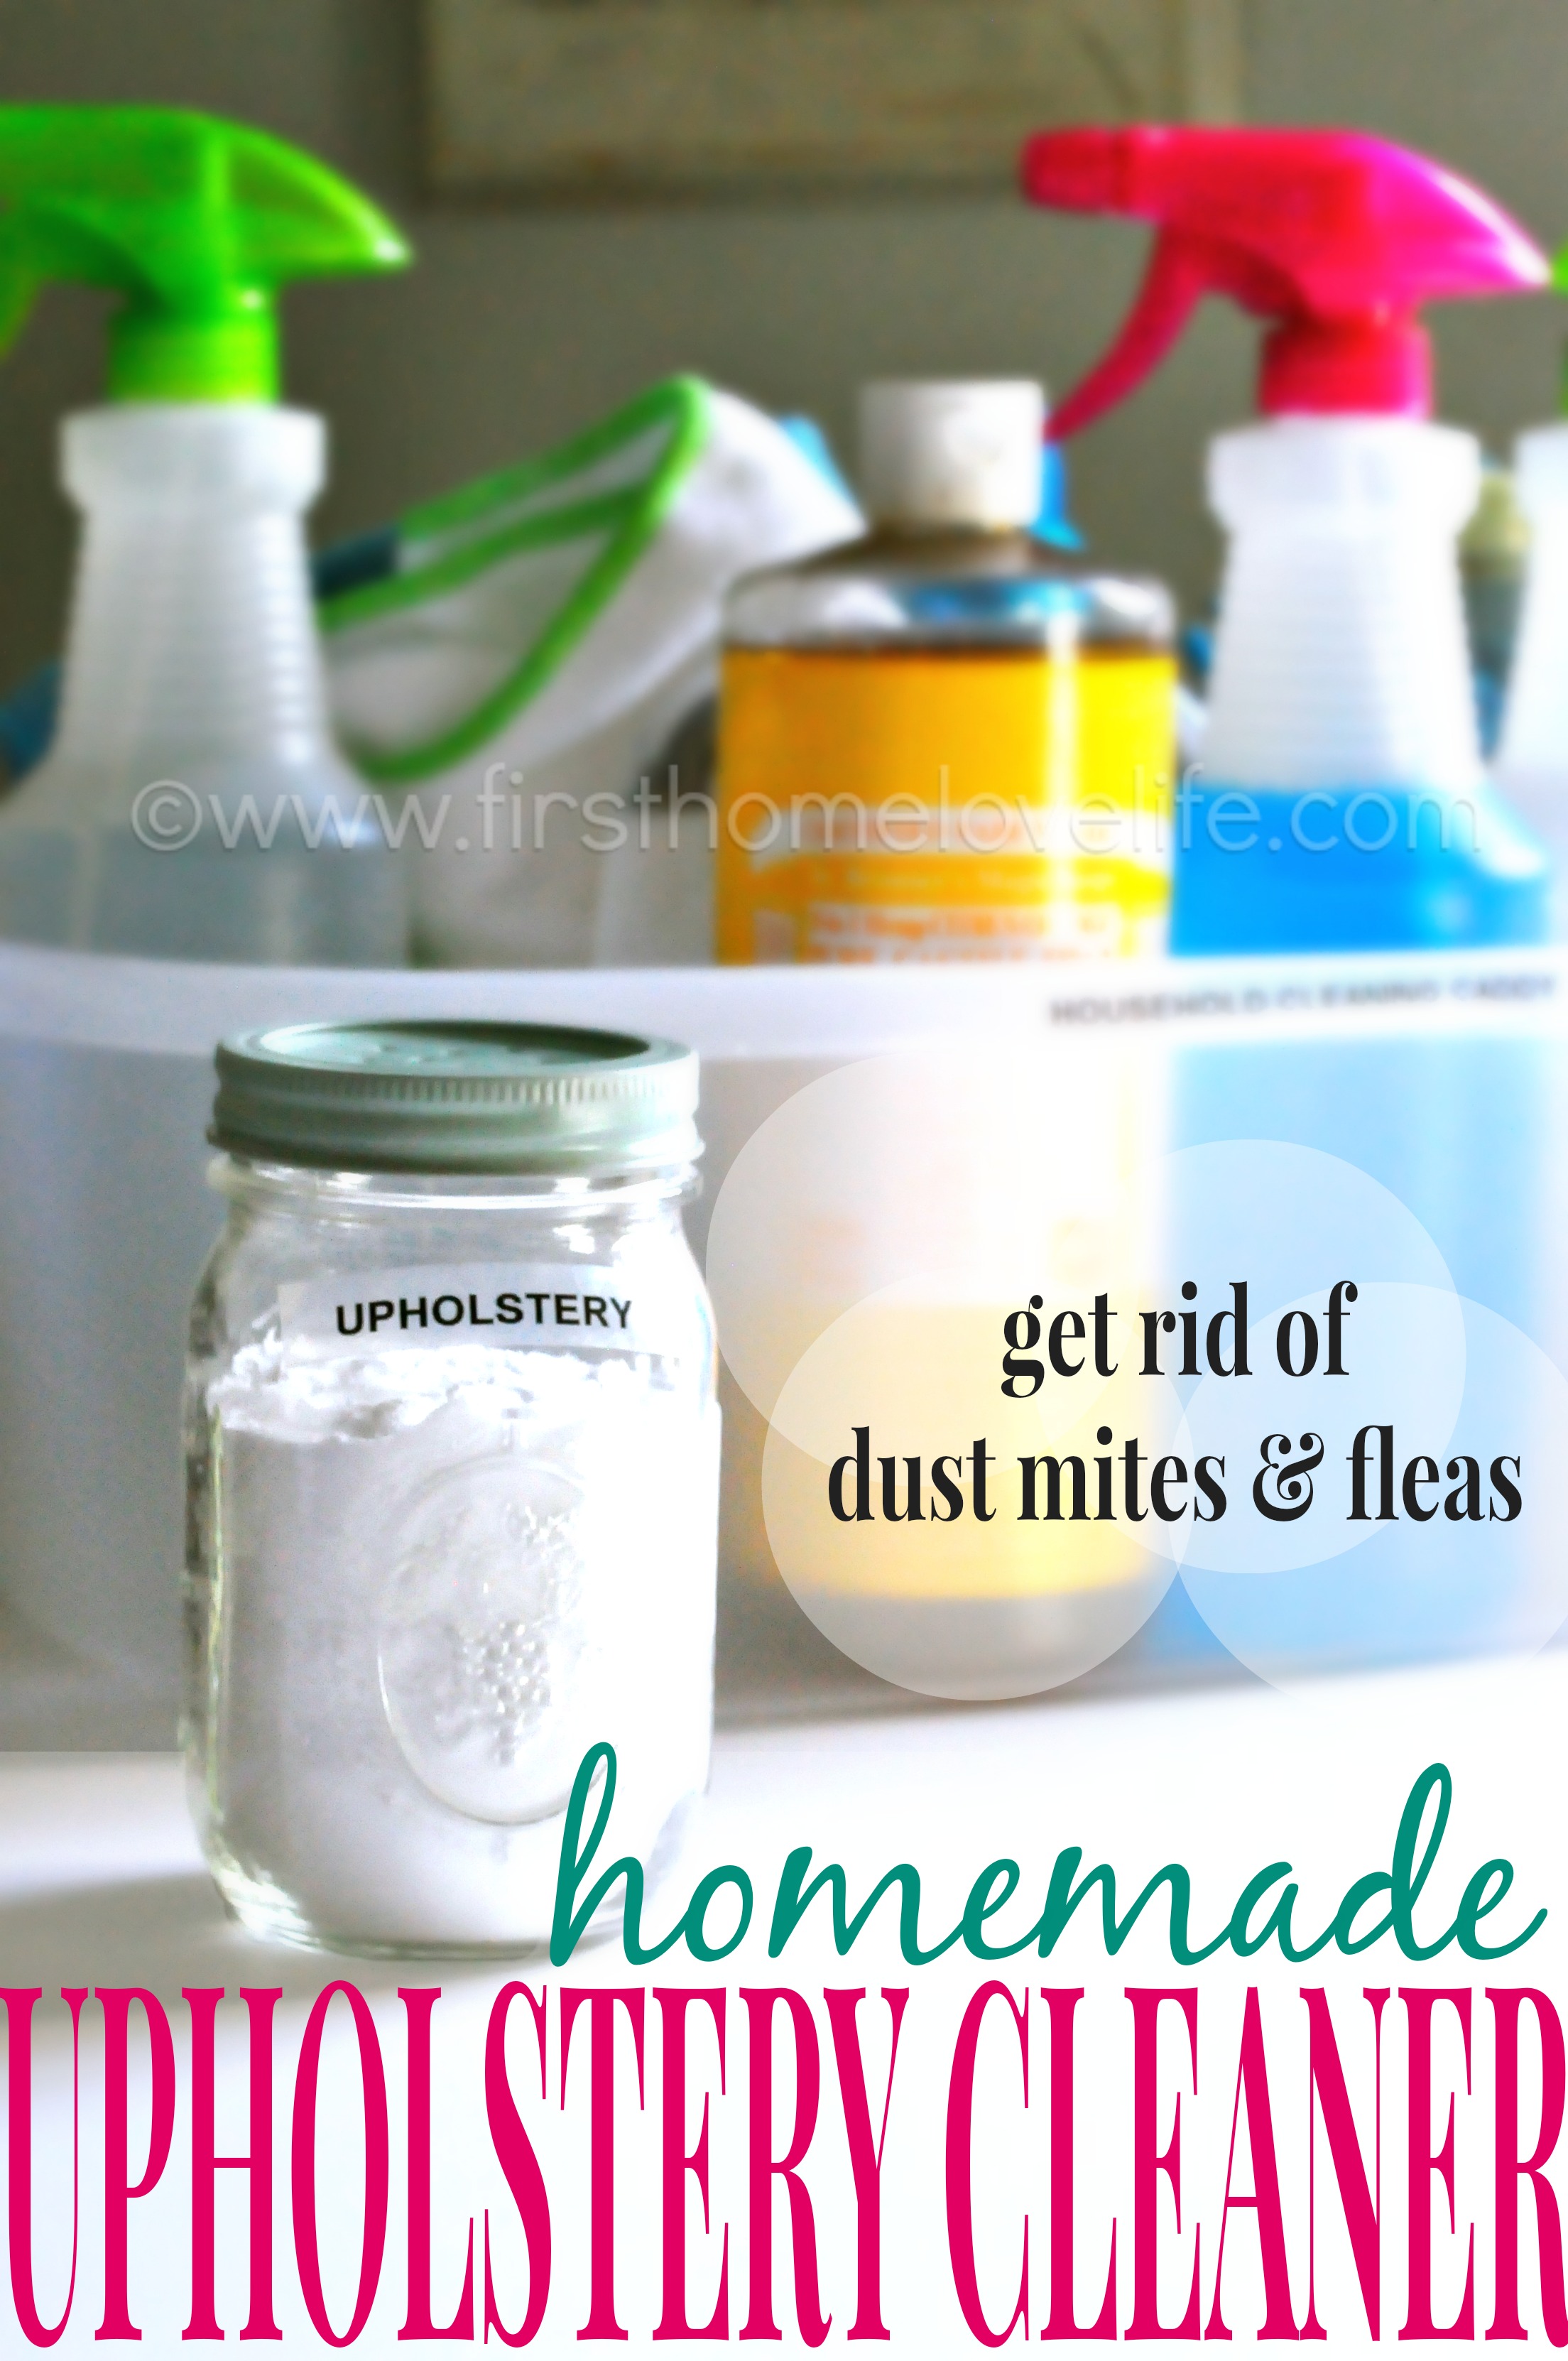 Homemade Upholstery Cleaner - First Home Love Life